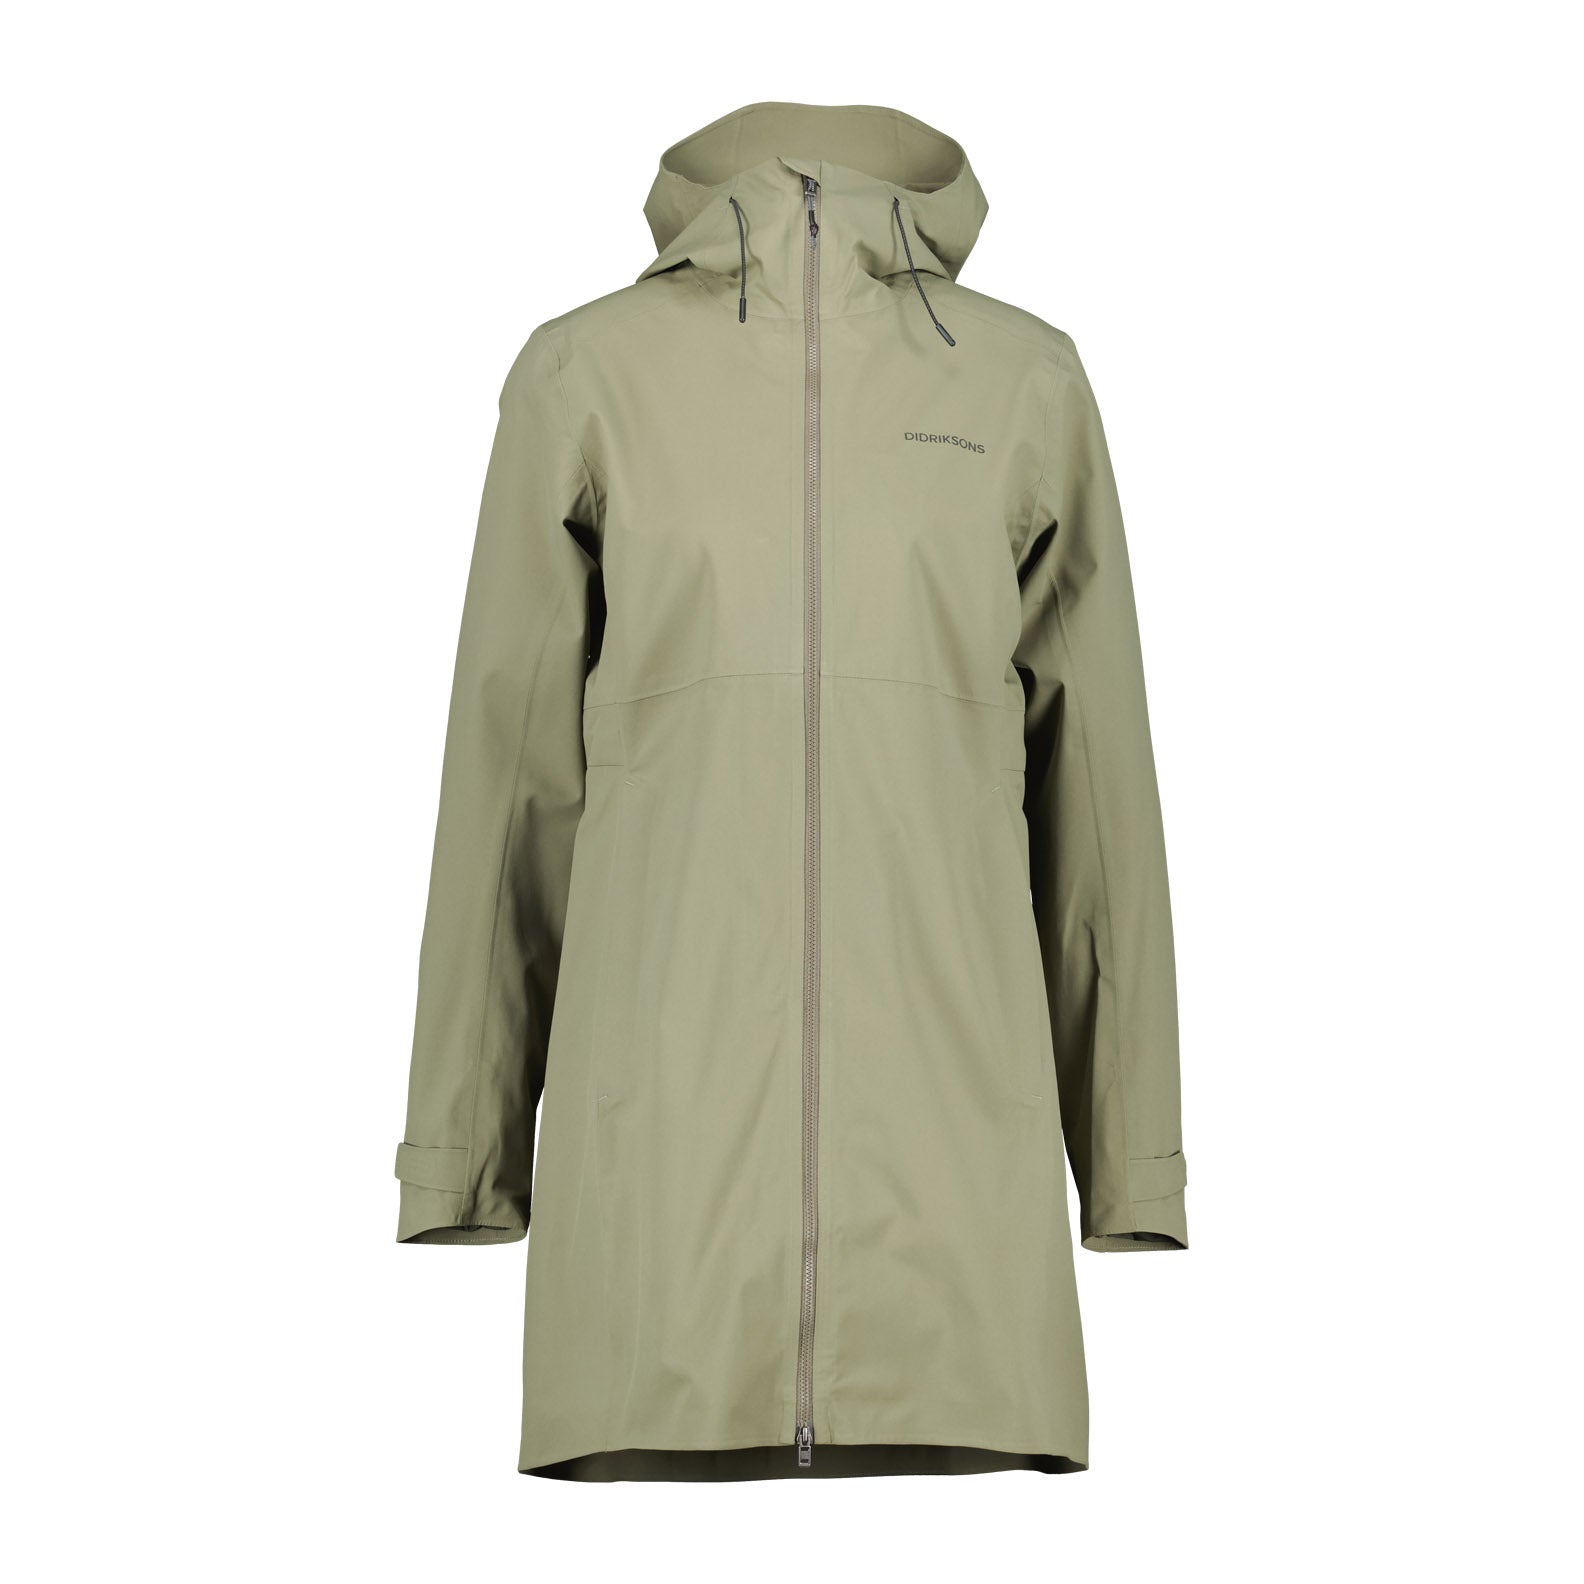 cheapest order online Didriksons Ladies Bea Bea 4 4 Didriksons Parka ...